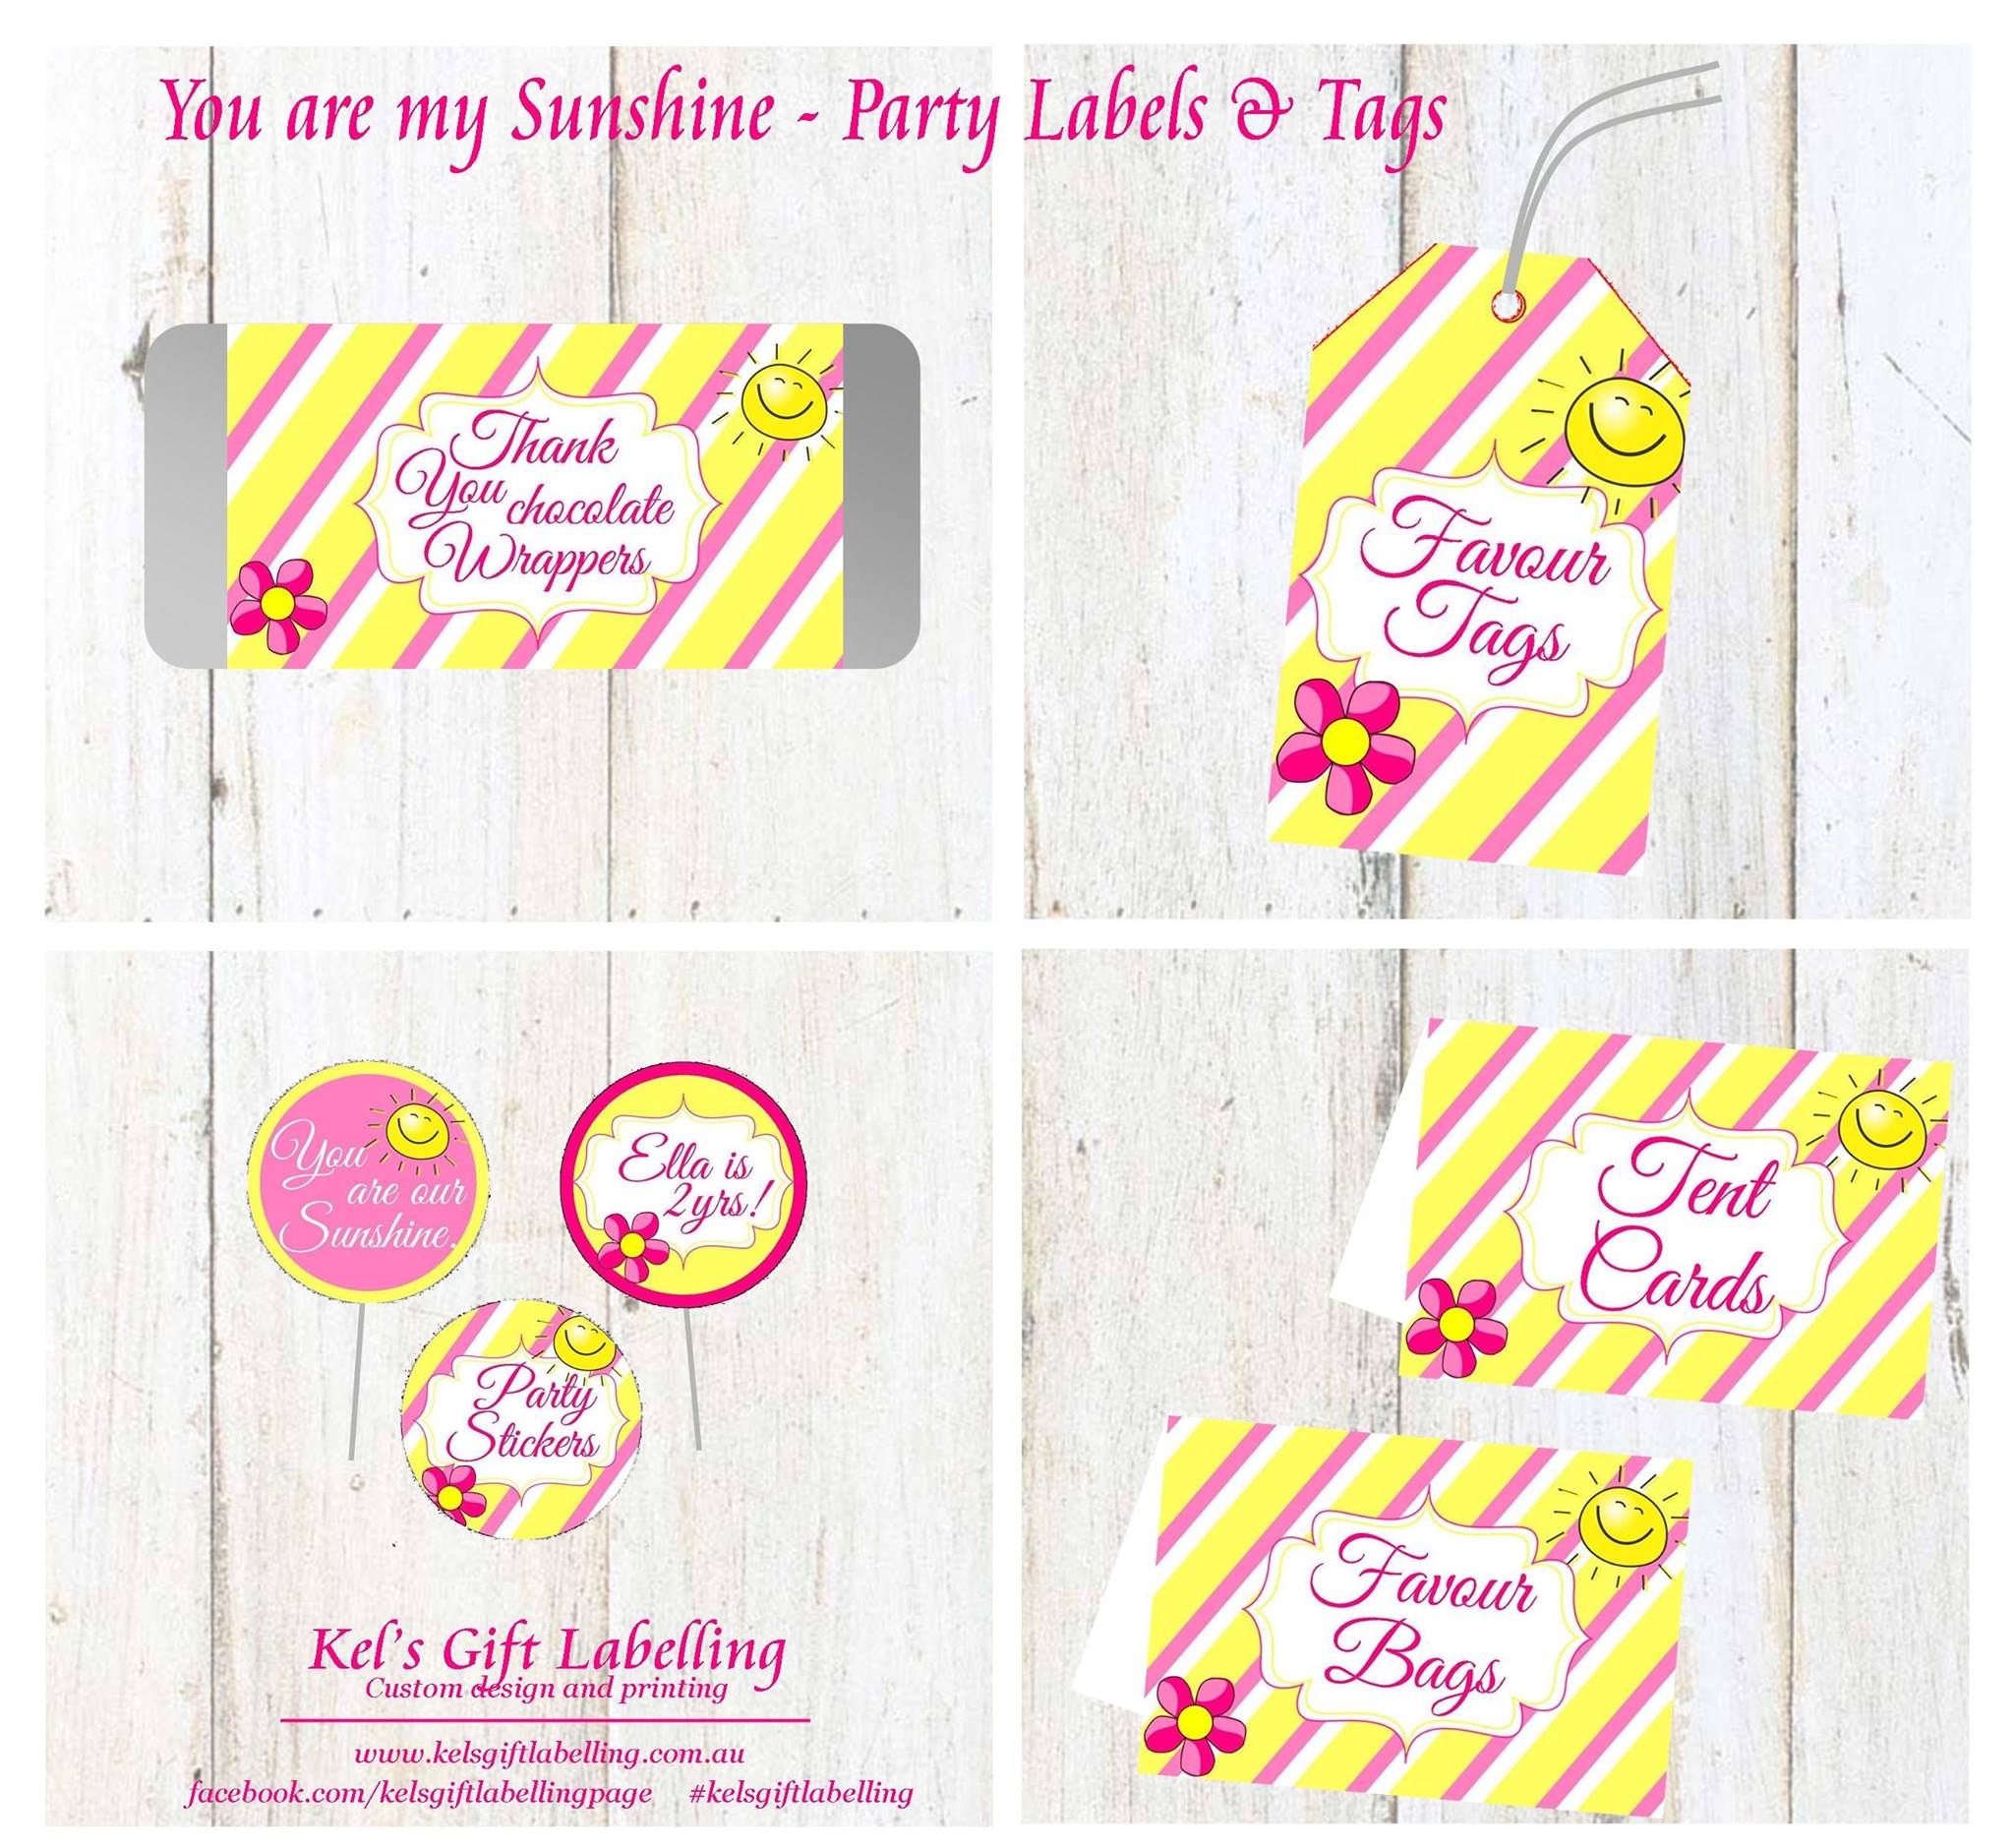 You are my sunshine party printables - Kel's Gift Labelling